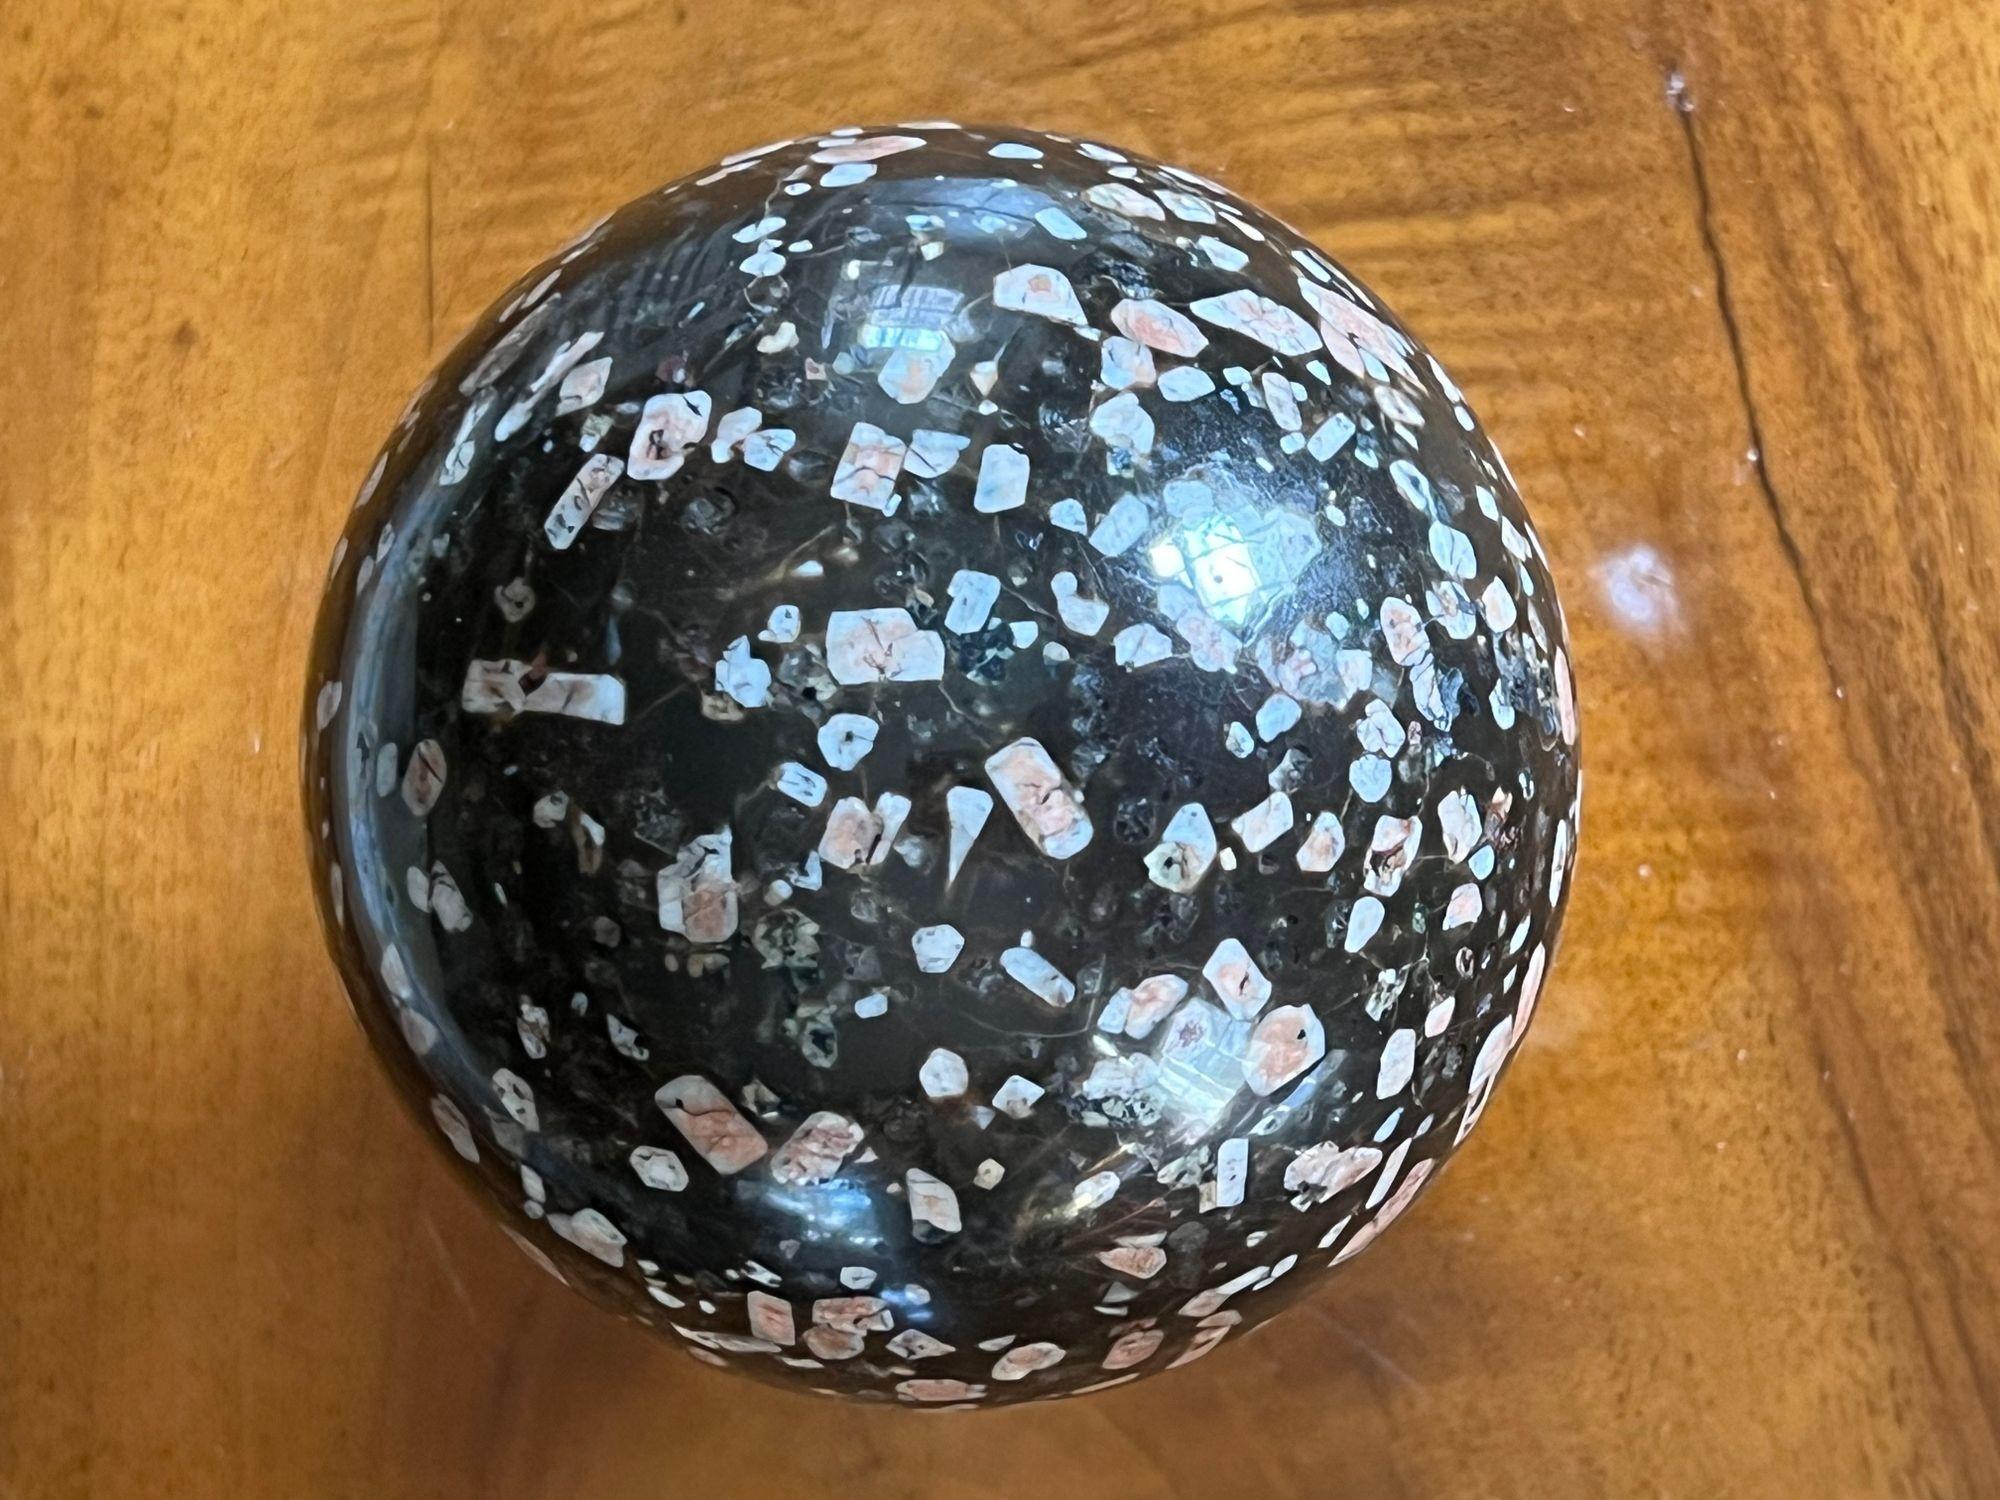 The purple/white stone in the shape of a sphere